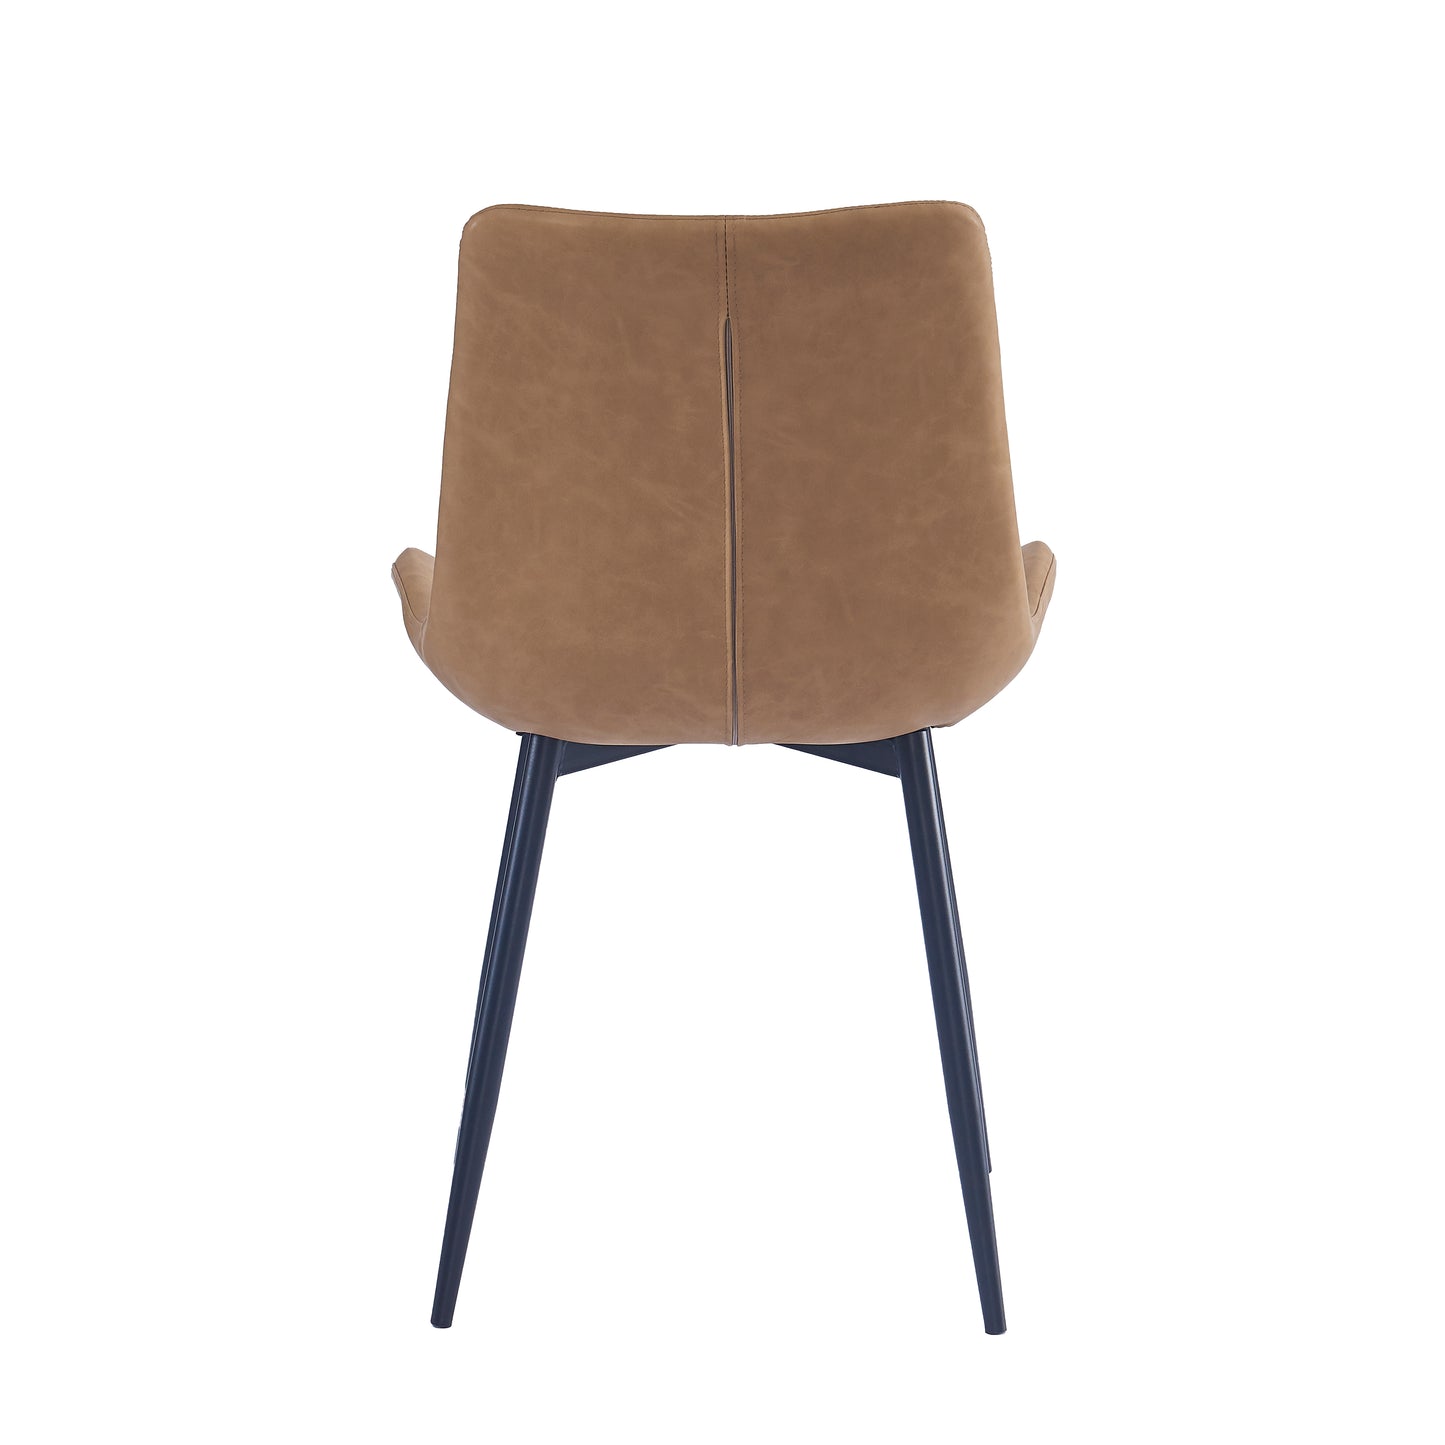 Criterion Apollo Dining Chair 830mm PU Leather Cushioned Seat, Carbon Steel Frame Beige